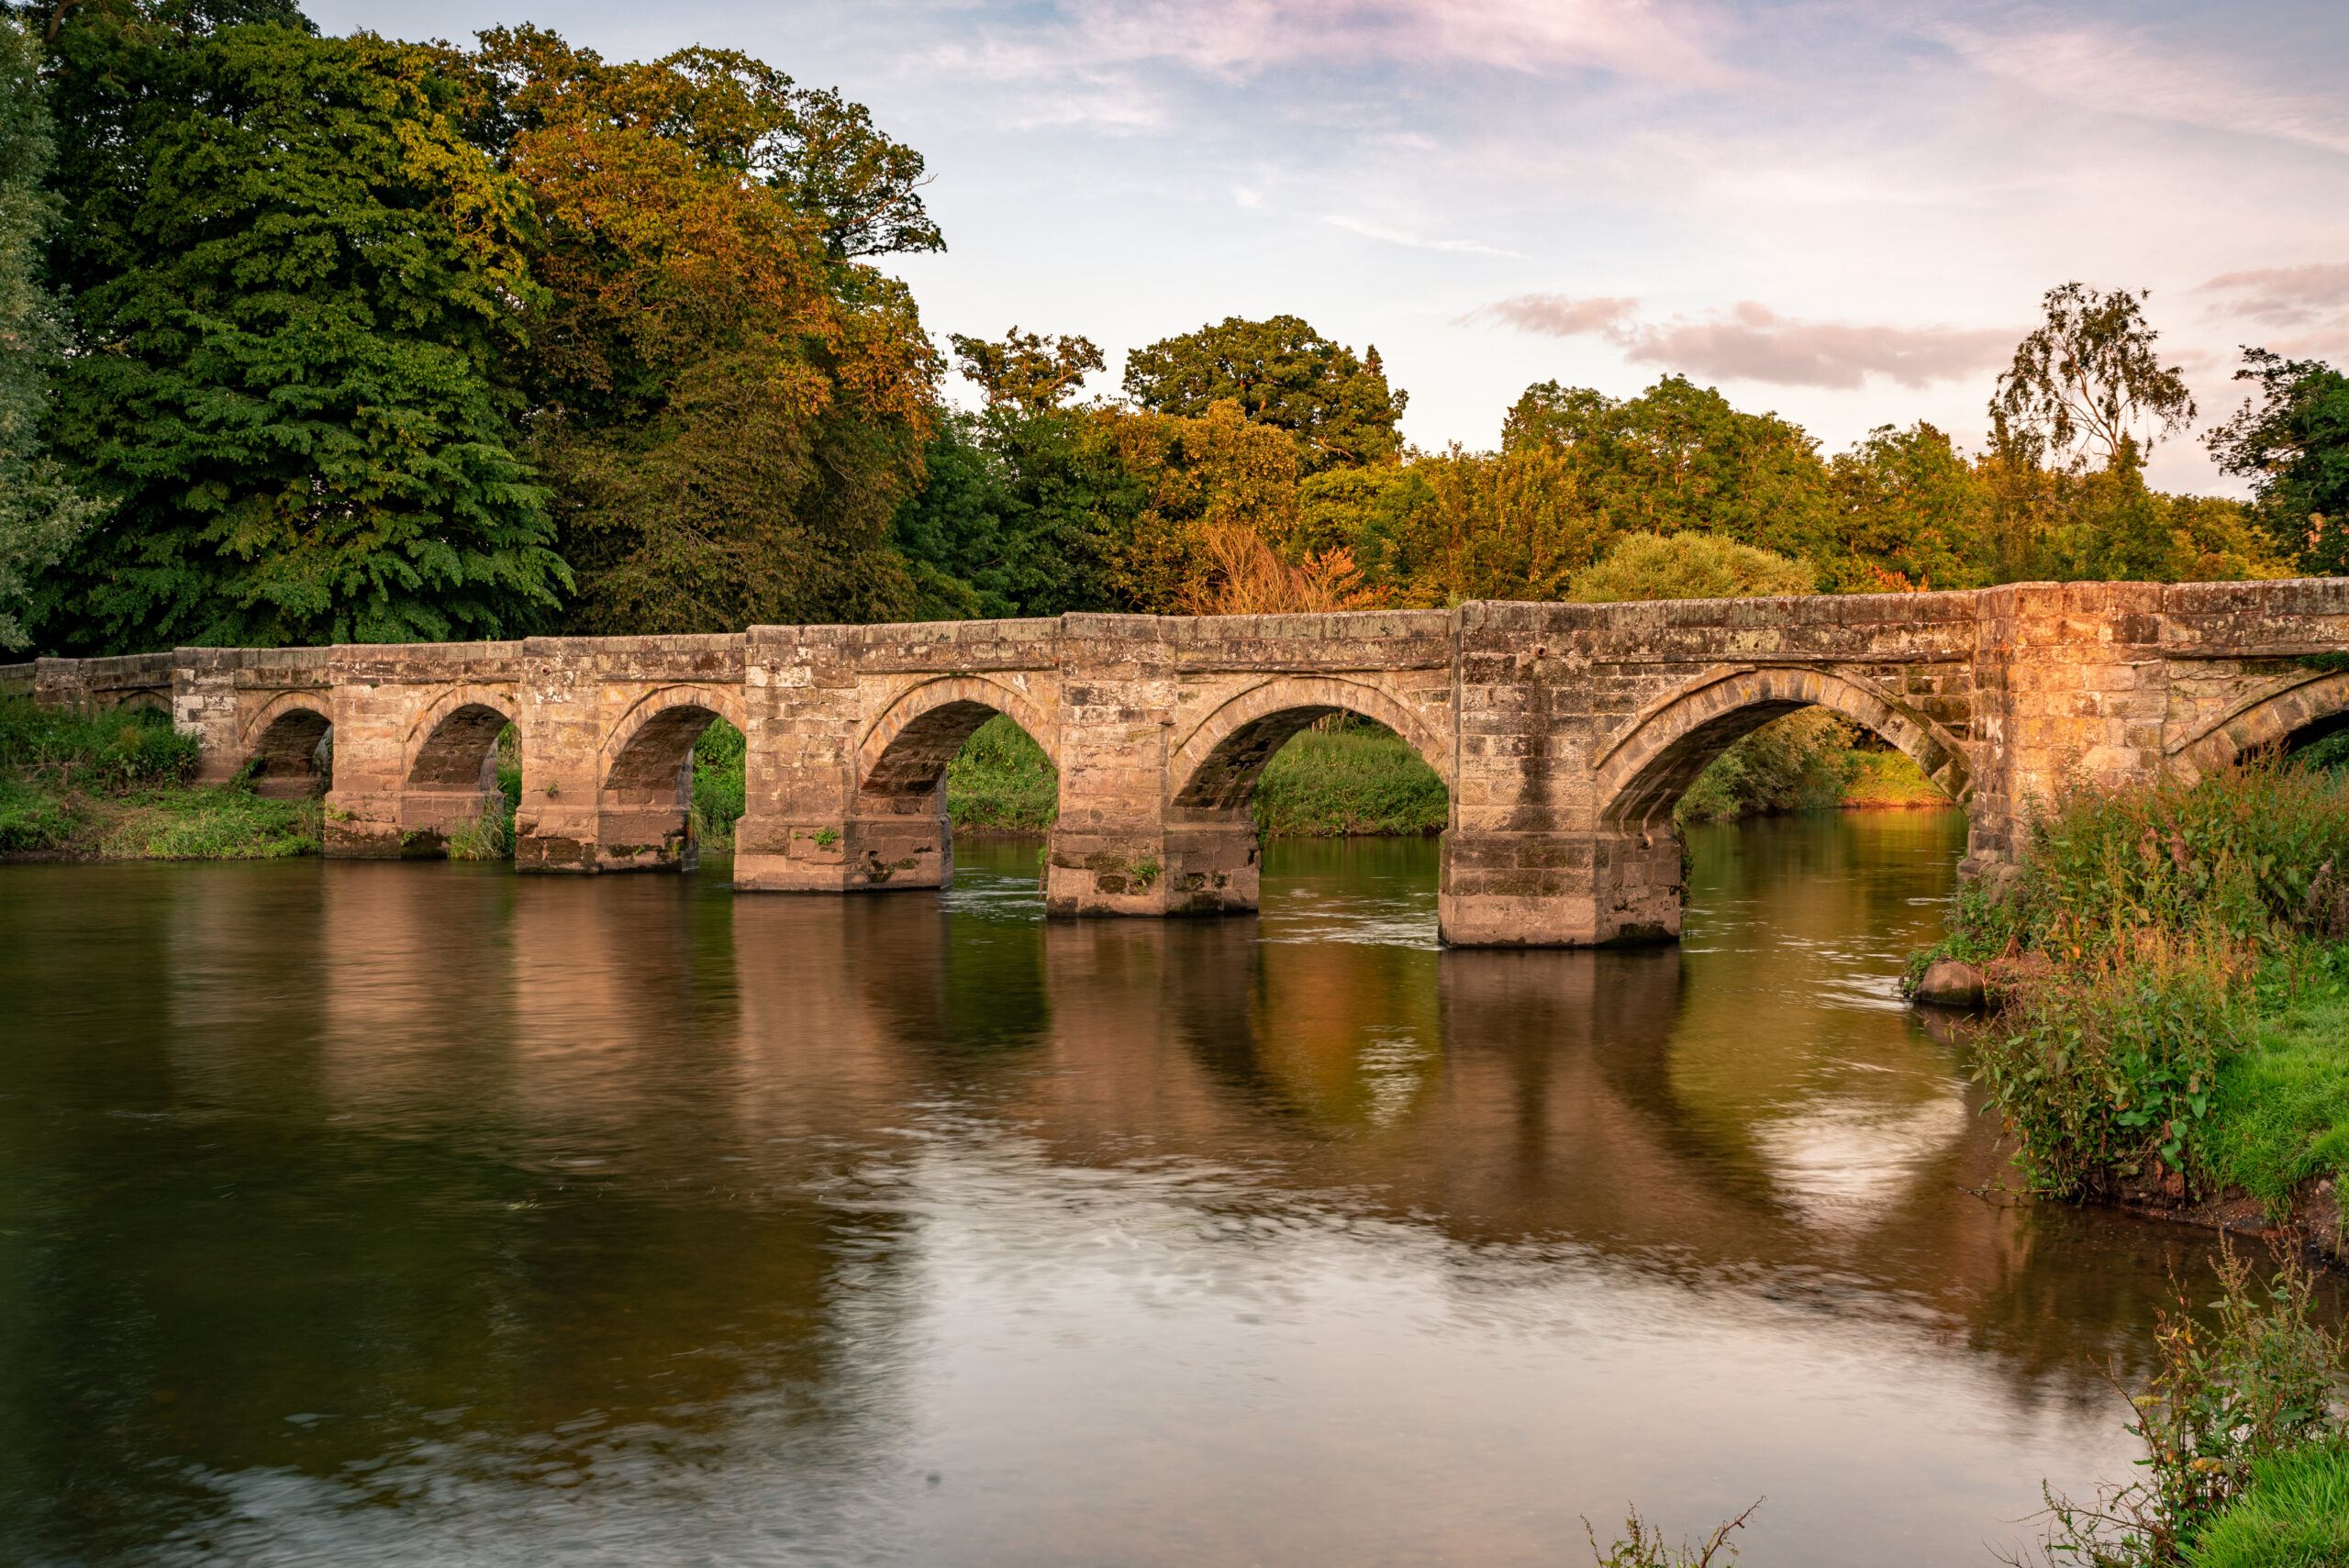 Essex bridge. A Grade I listed packhorse bridge spanning the River Trent at Great Haywood, in Staffordshire.